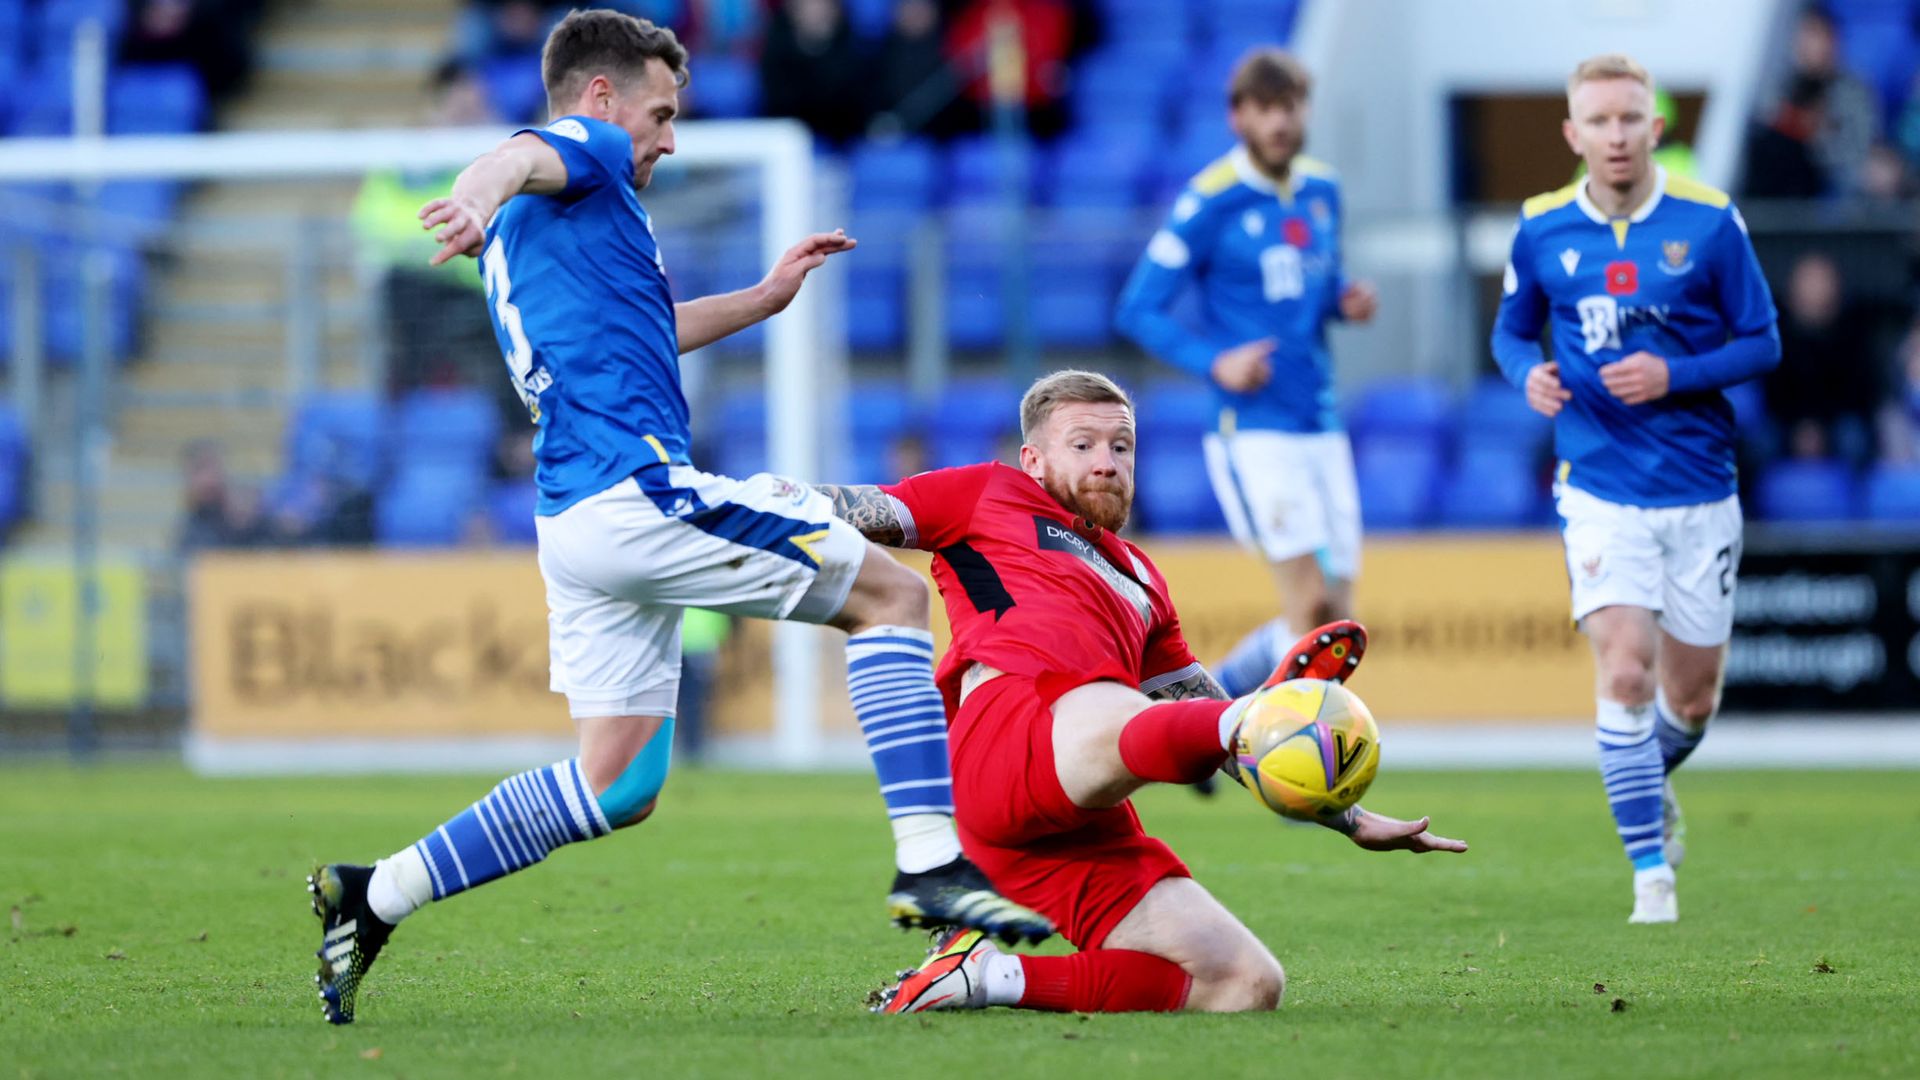 Kane sent off as St Johnstone draw with St Mirren